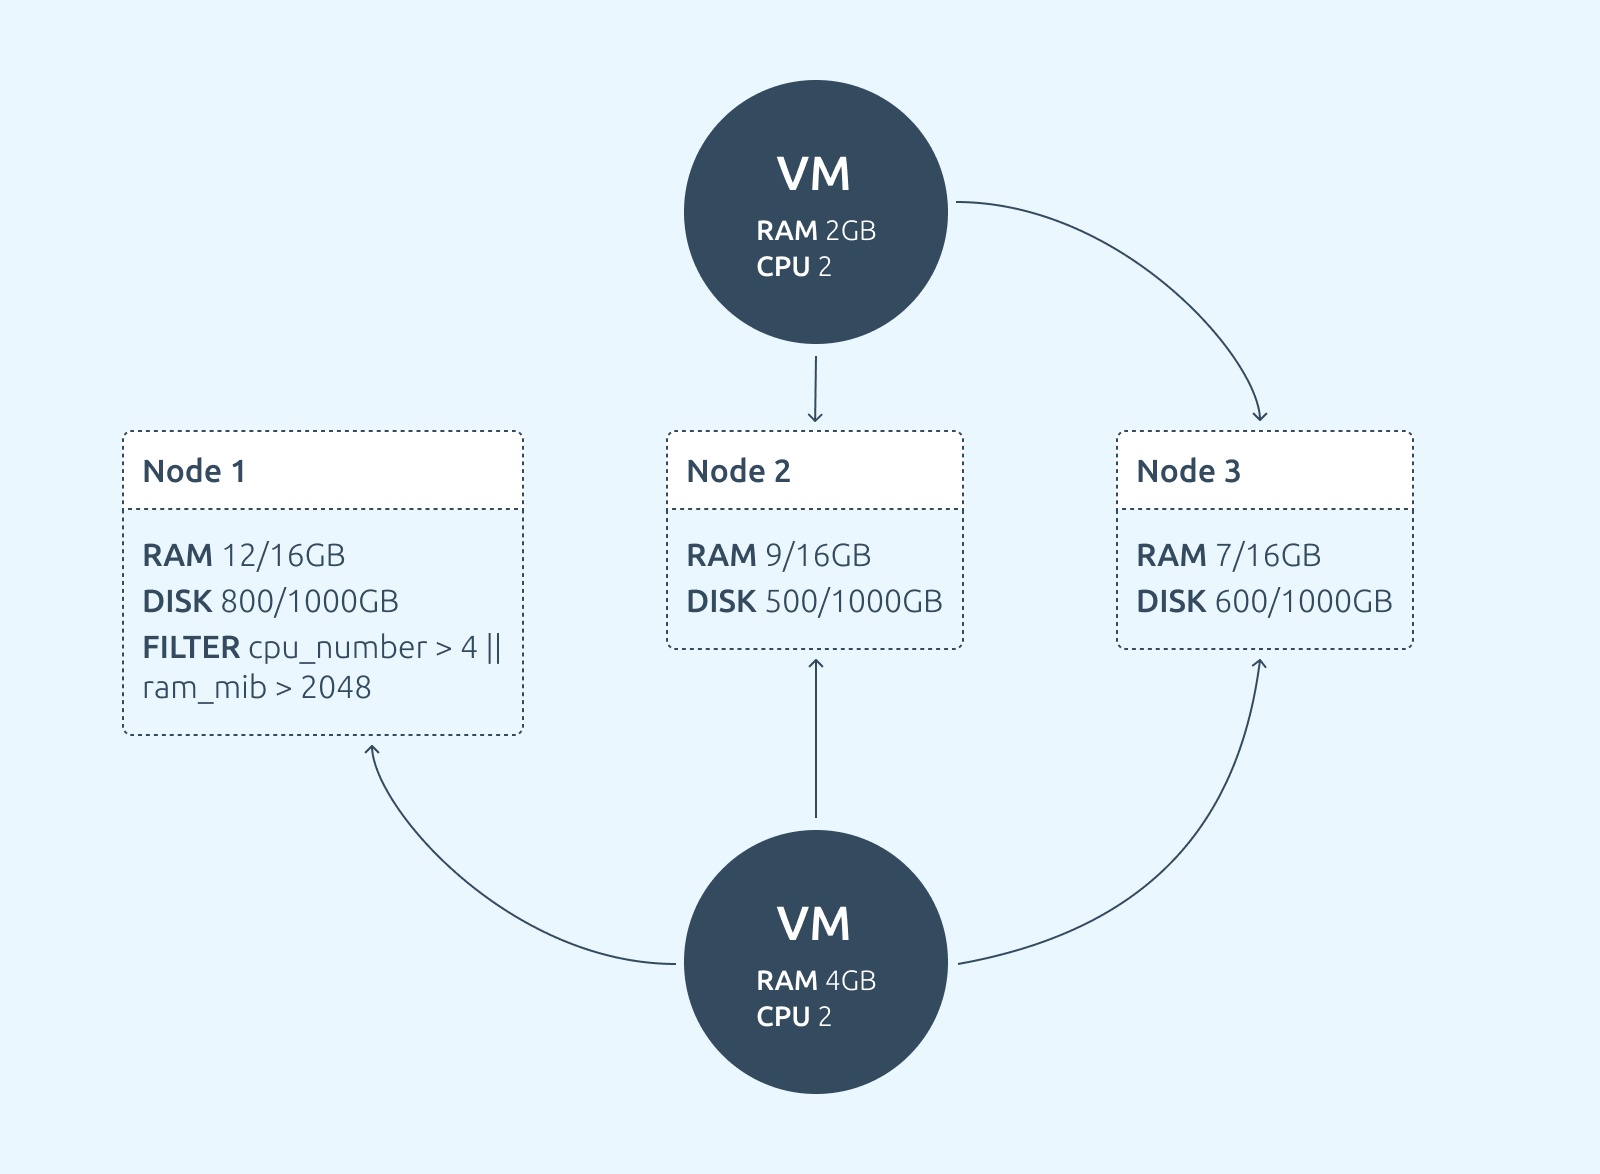 An example of a composite VM distribution filter VMs with RAM > 2G or with vCPU > 4 need to be created on the node